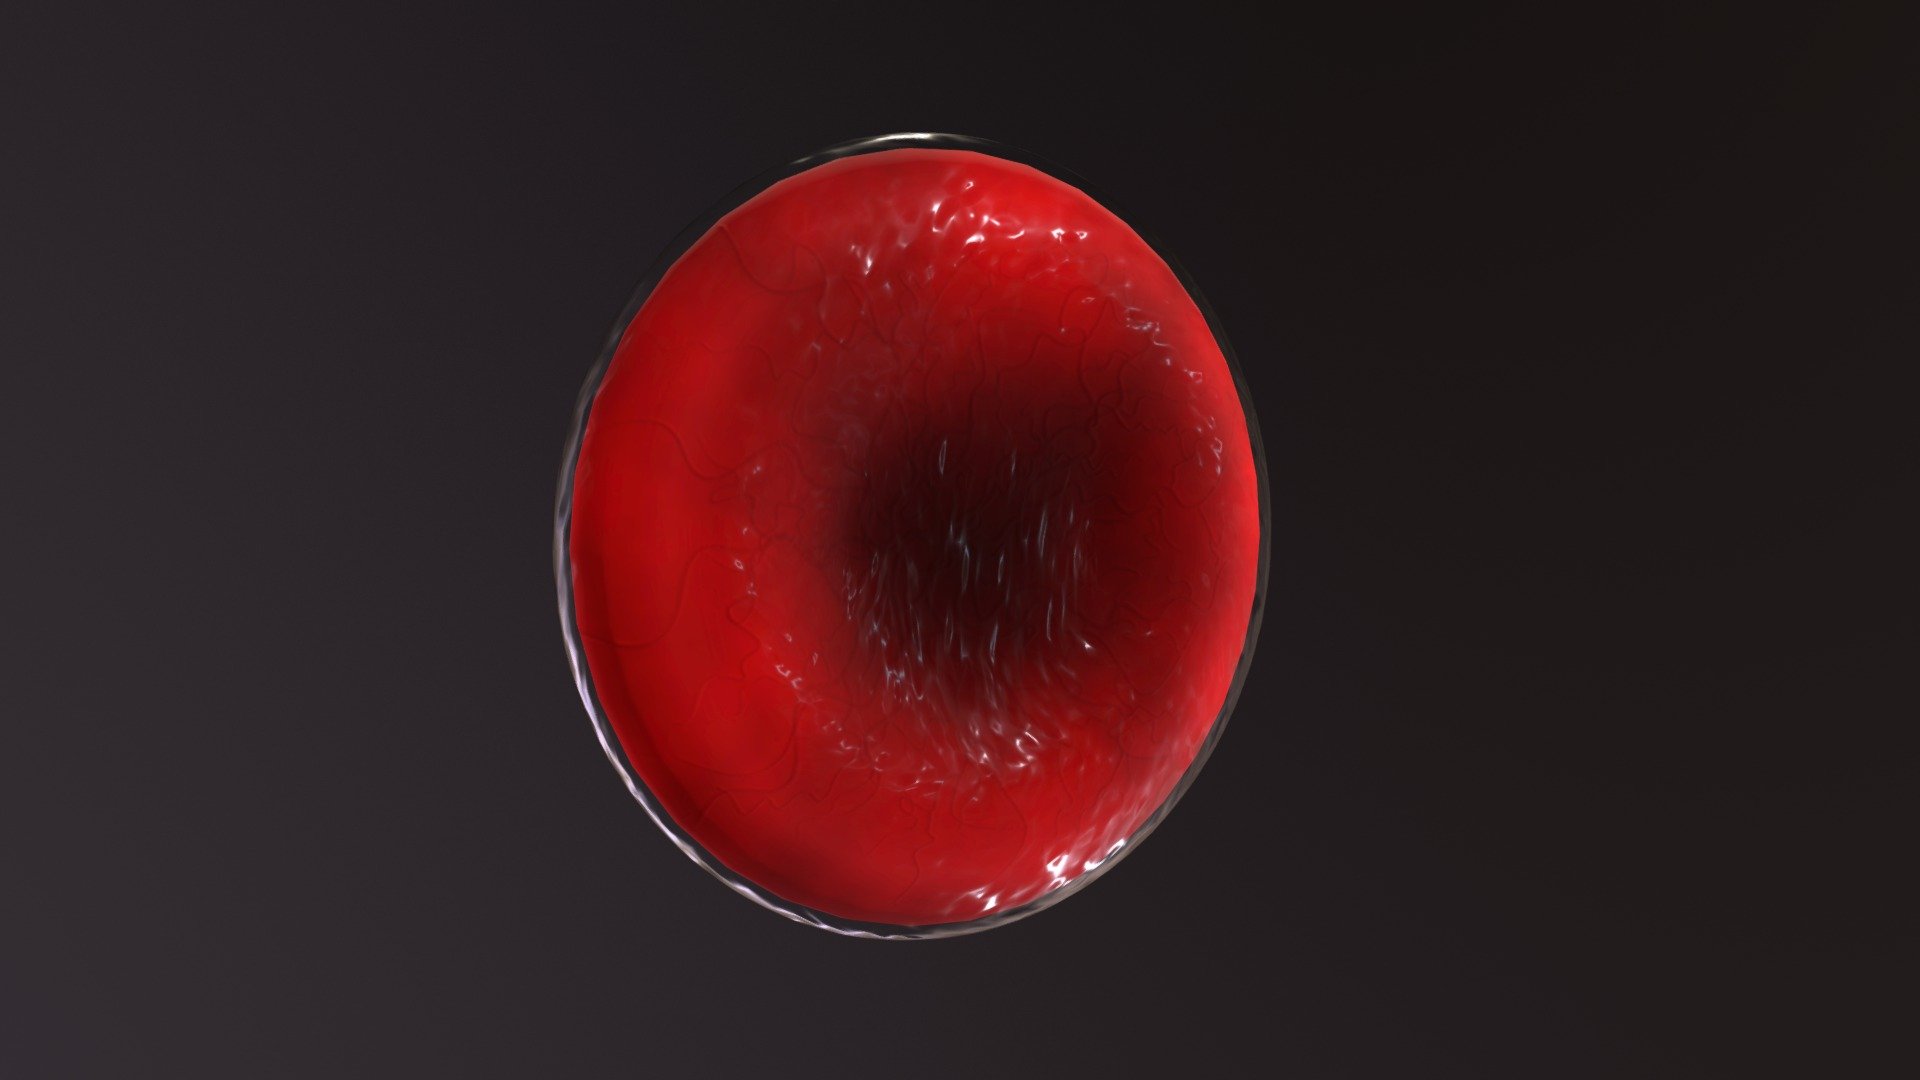 Red blood cells (RBCs), also called erythrocytes, are the most common type of blood cell. Mature red blood cells are flexible bioconcave disks. They lack a cell nucleus and most organelles in order to accommodate maximum space for hemoglobin. They can be viewed as plasma membrane &ldquo;sack